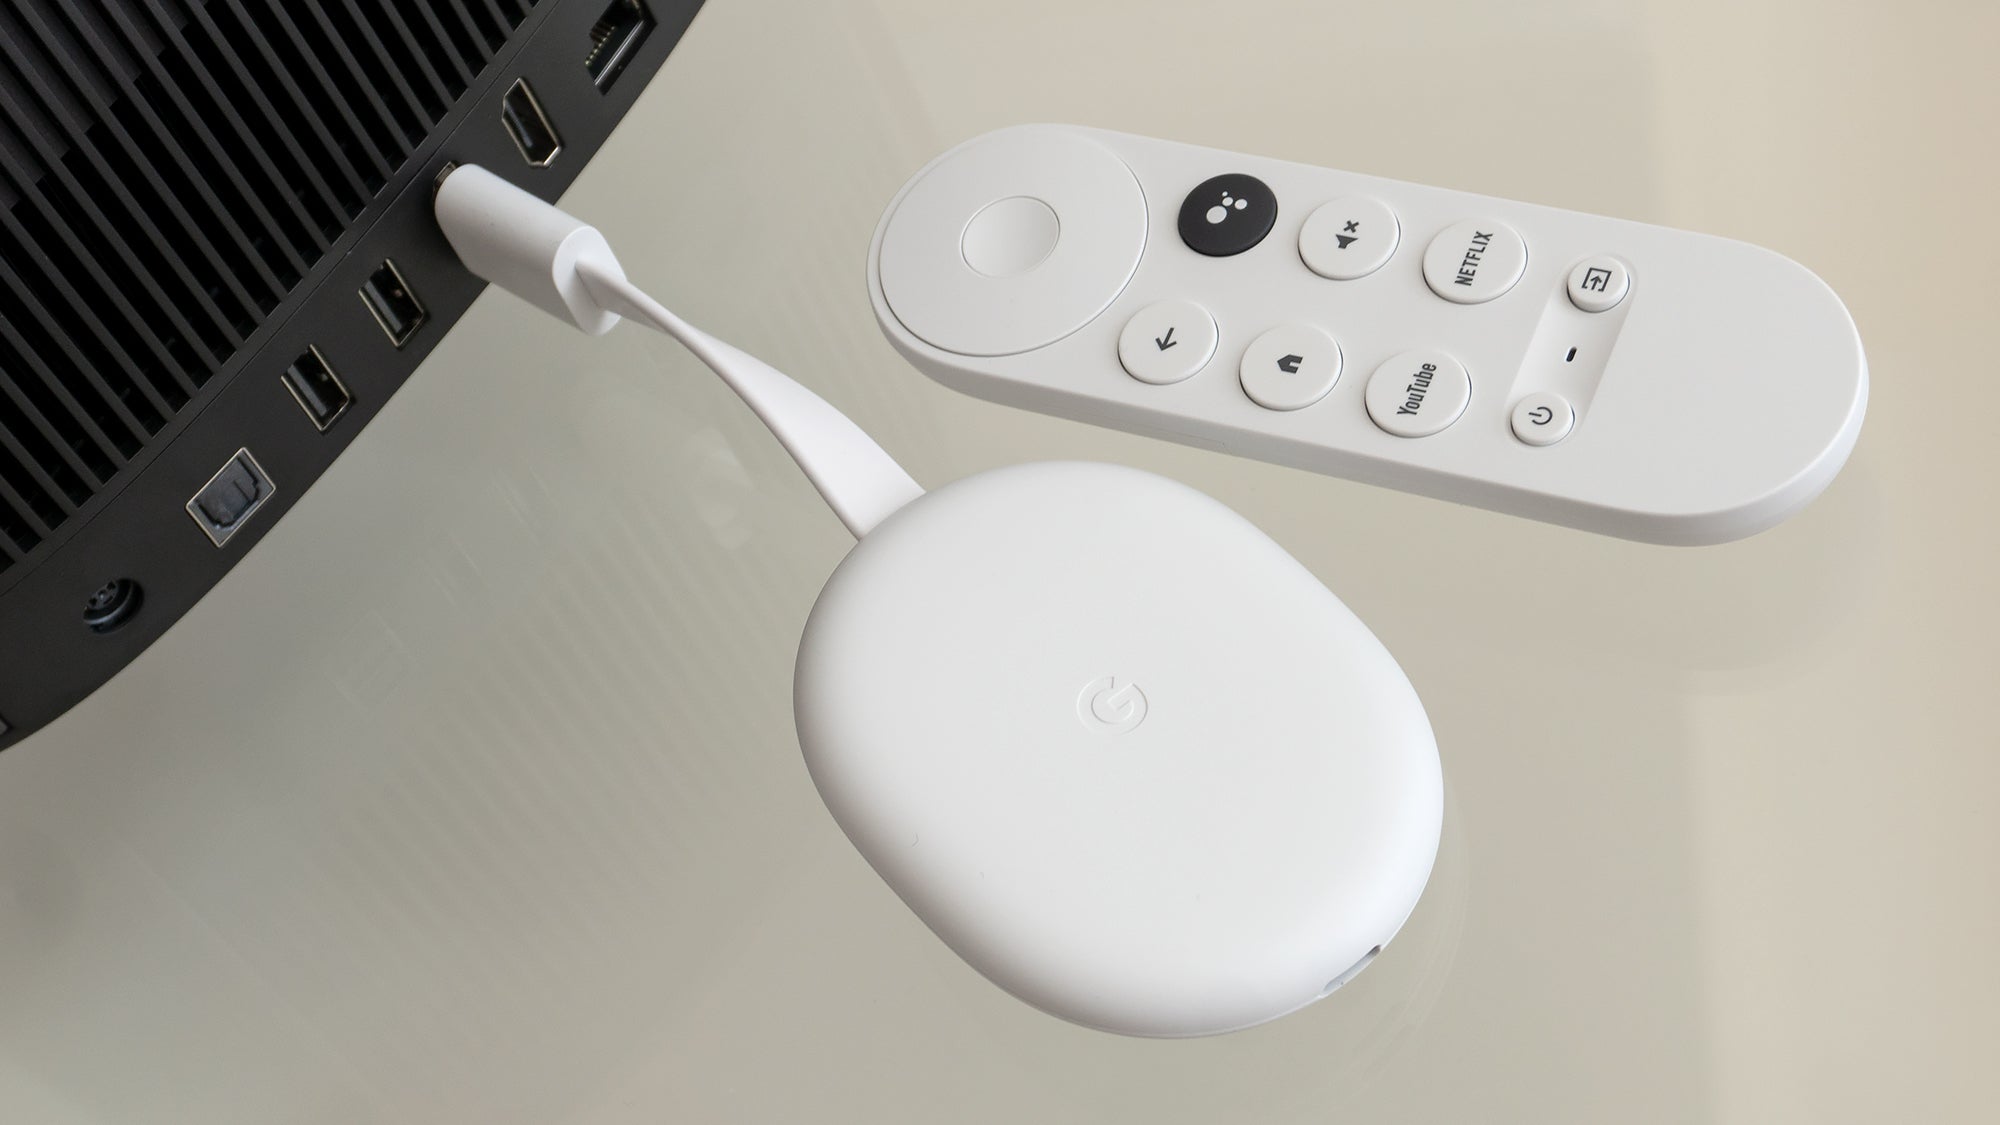 Even with Google TV installed, Netflix isn't available for the Horizon Pro, so you might want to consider pairing it with a cheap streaming dongle. (Photo: Andrew Liszewski/Gizmodo)